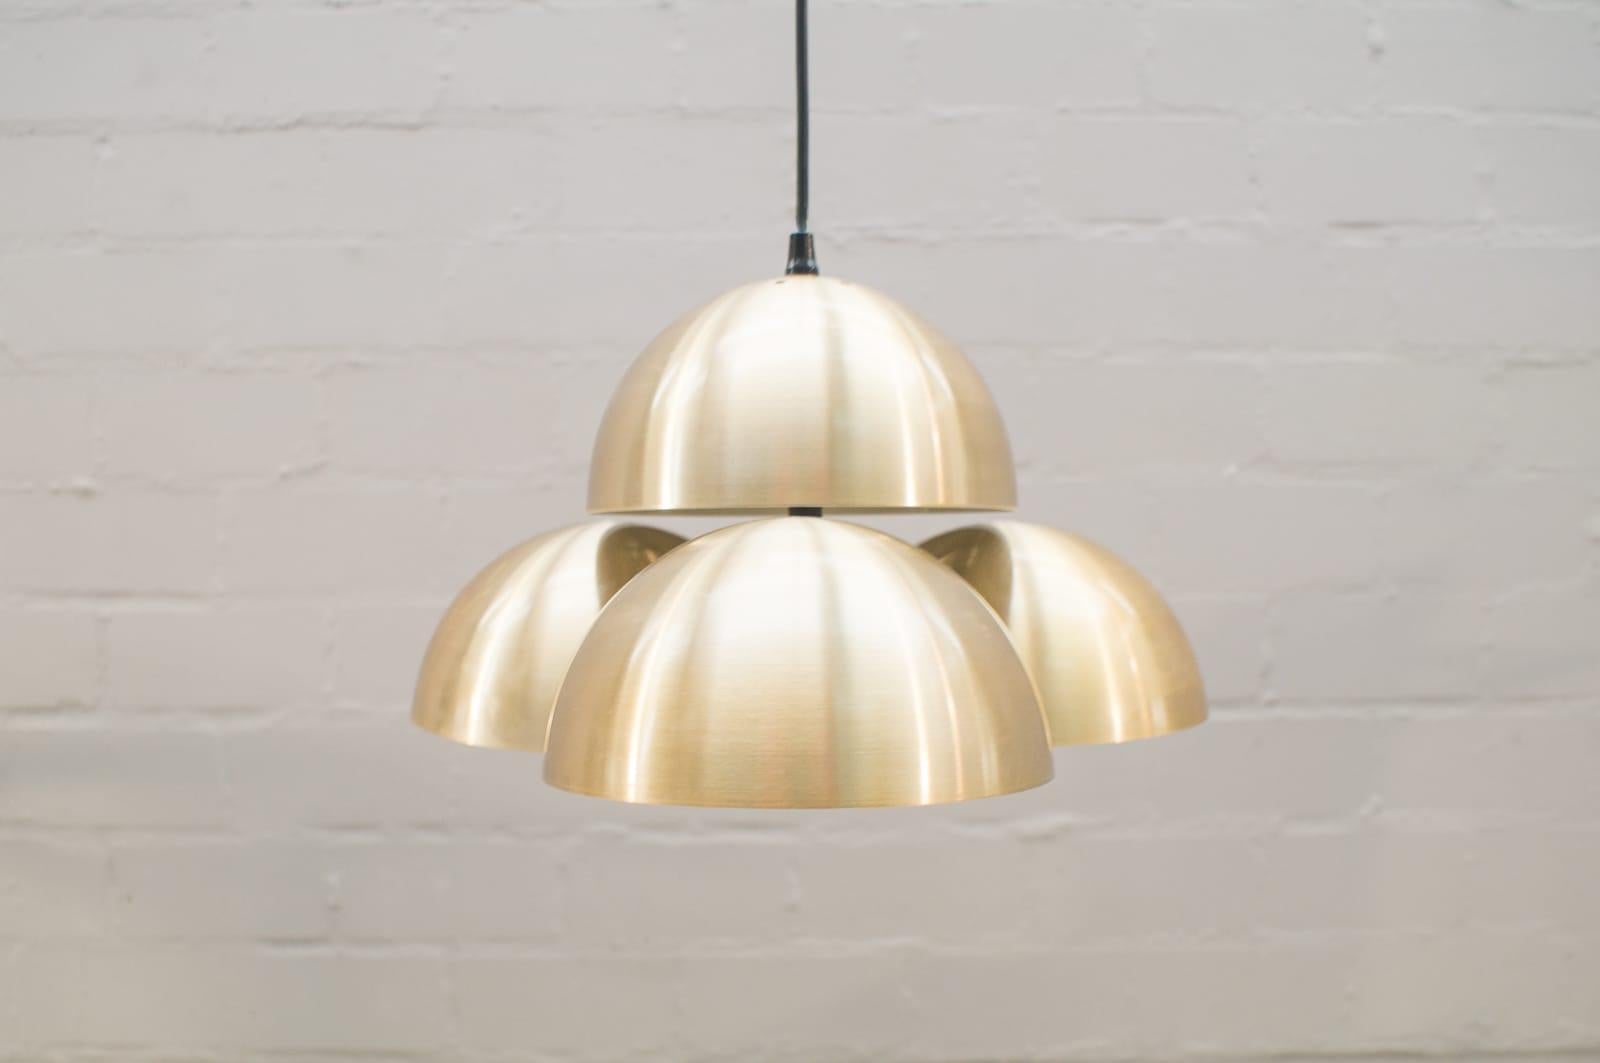 Extremely rare and impressive Mid-Century Modern pendant lamp in the style of Maija Liisa Komulainen for RAAK, Amsterdam, the Netherlands. This lamp seems to be a pendant version of famous 'Cantharel' table lamp. But I have no proof of it.